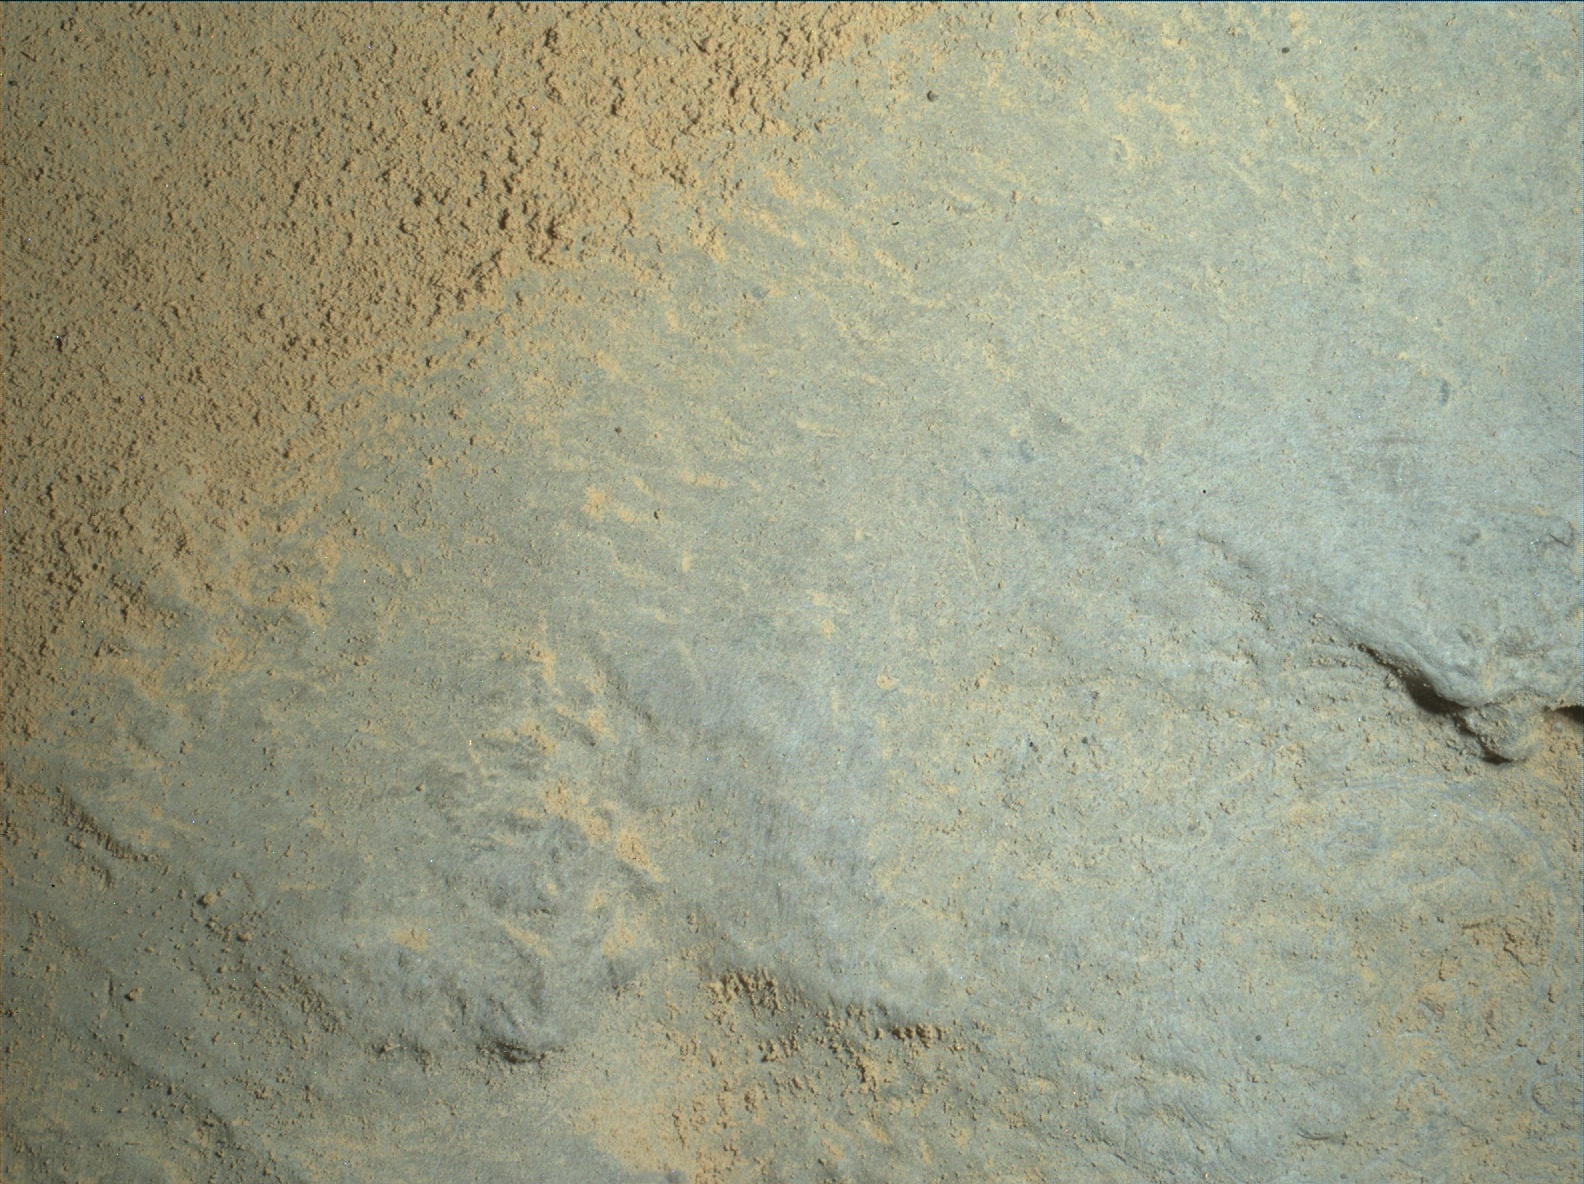 Nasa's Mars rover Curiosity acquired this image using its Mars Hand Lens Imager (MAHLI) on Sol 809